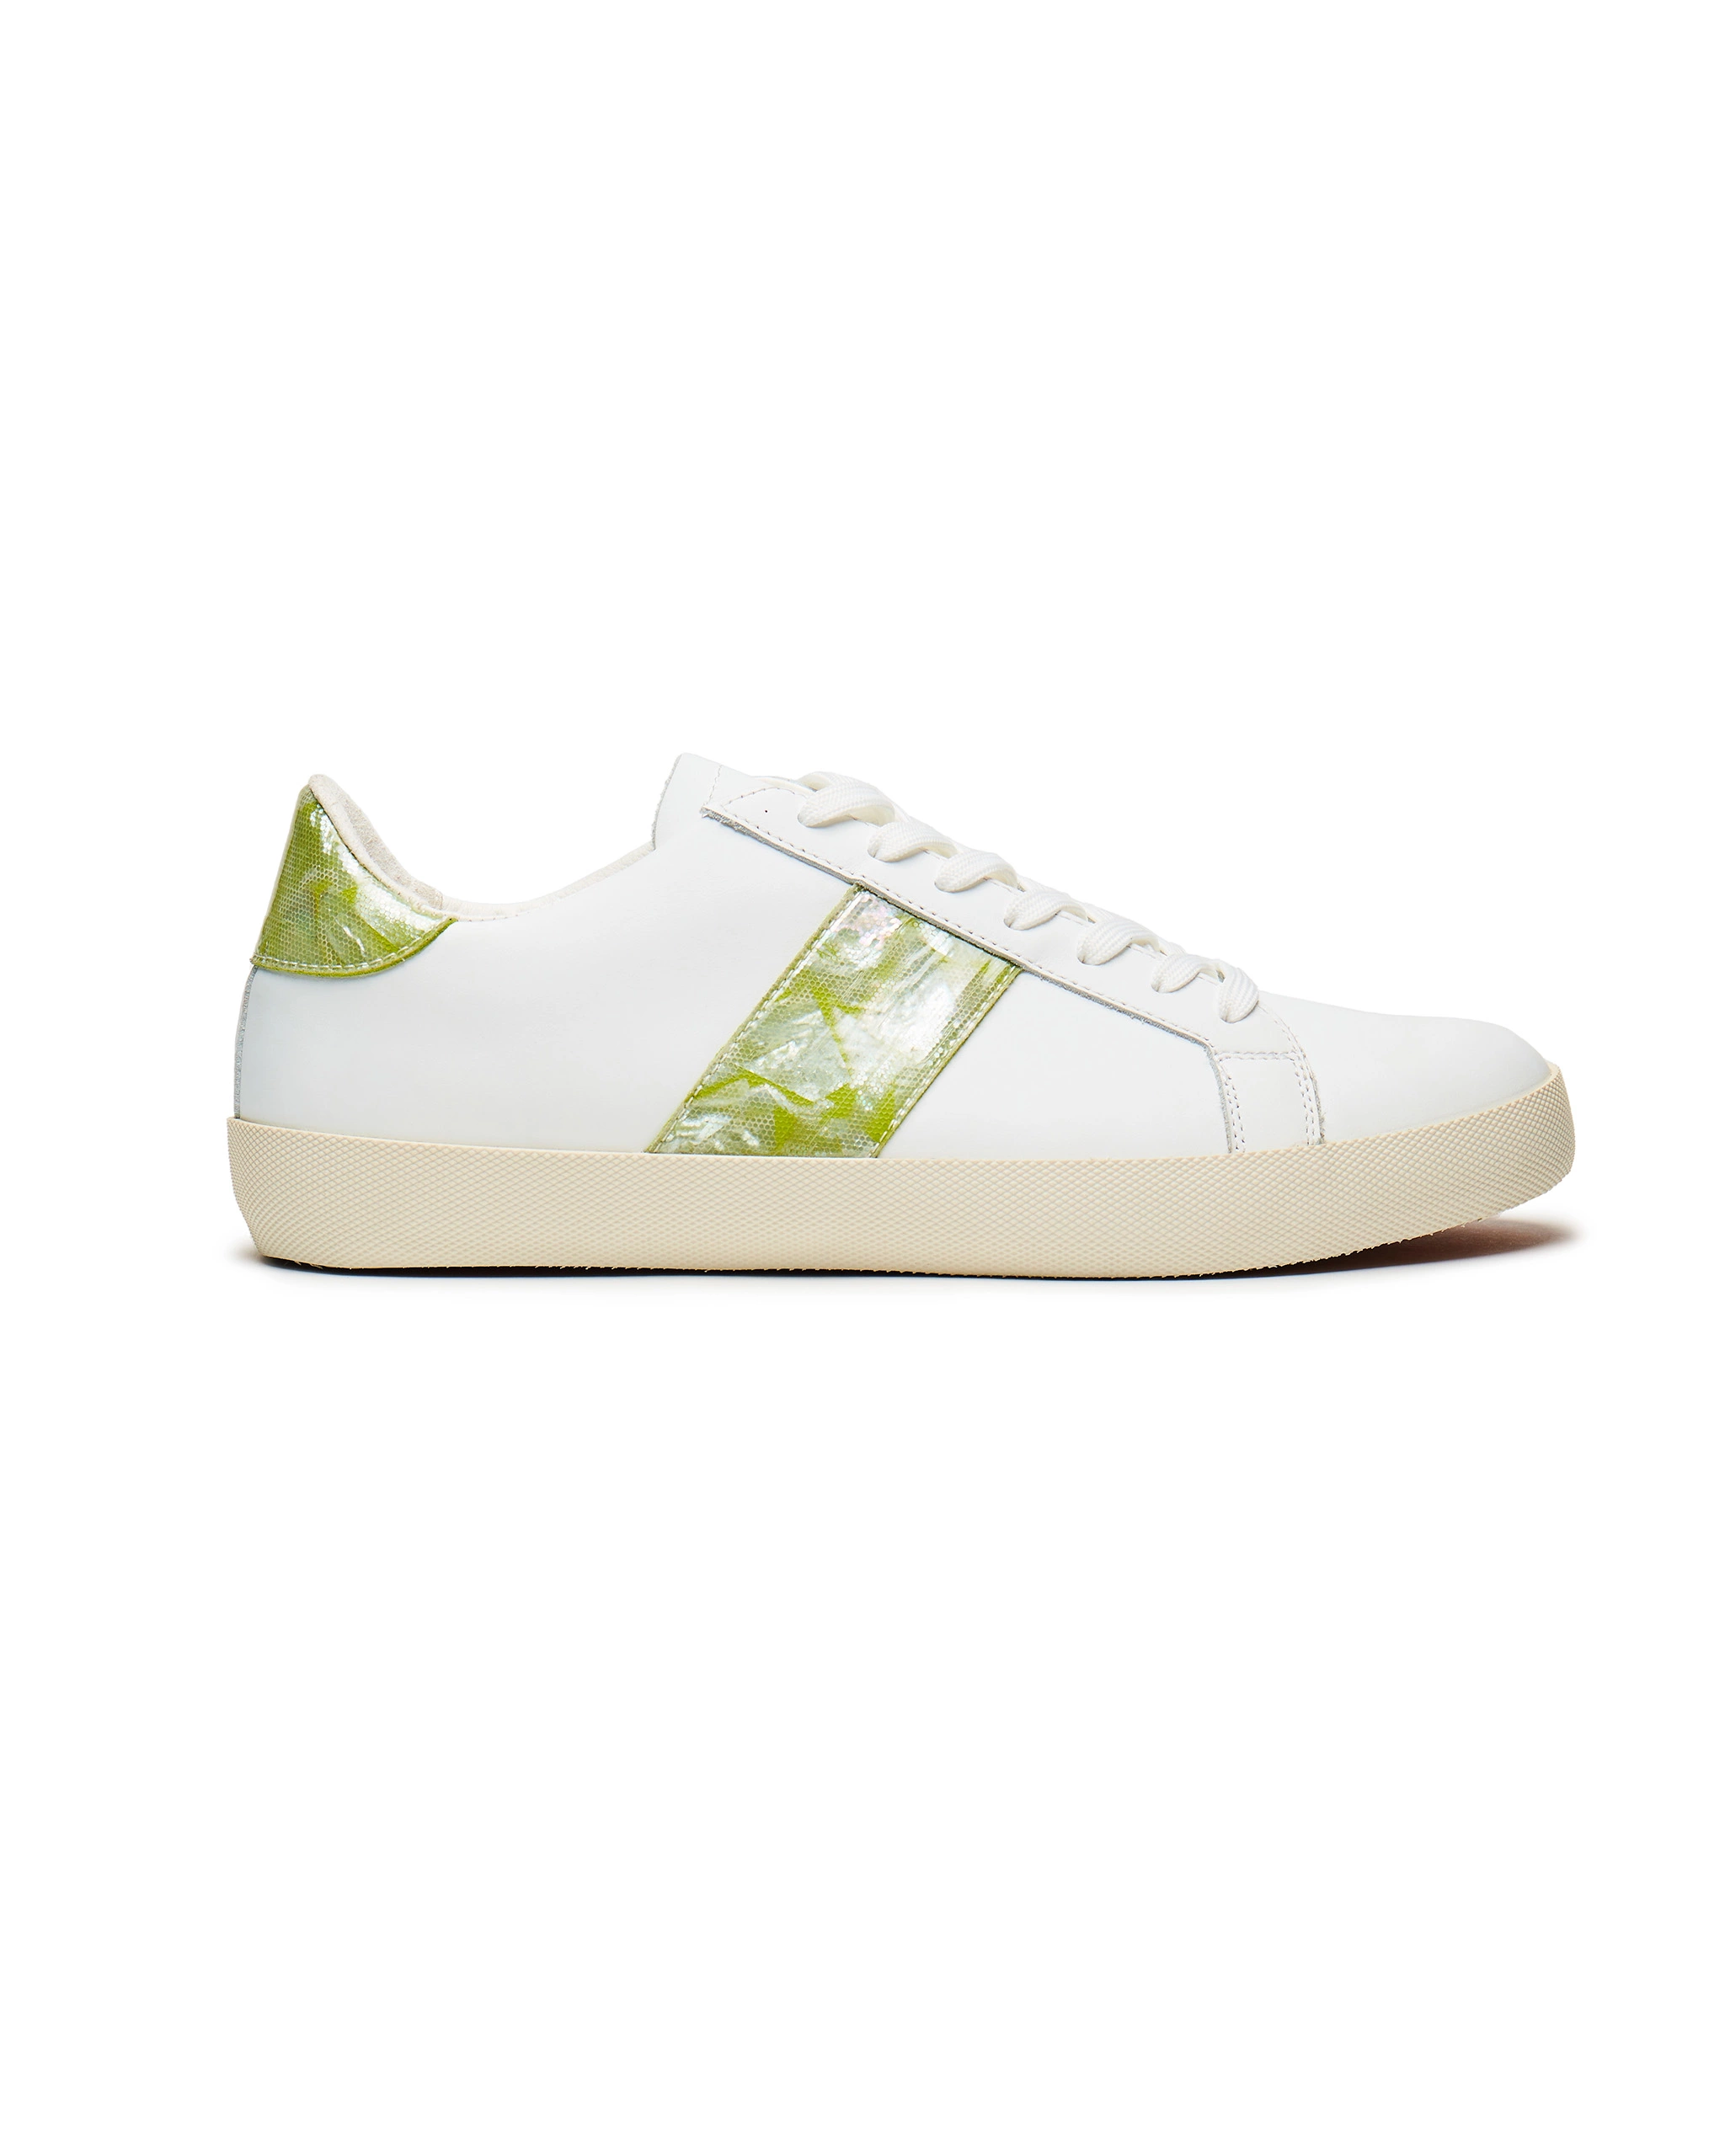 a white and green mother of pearl shoe